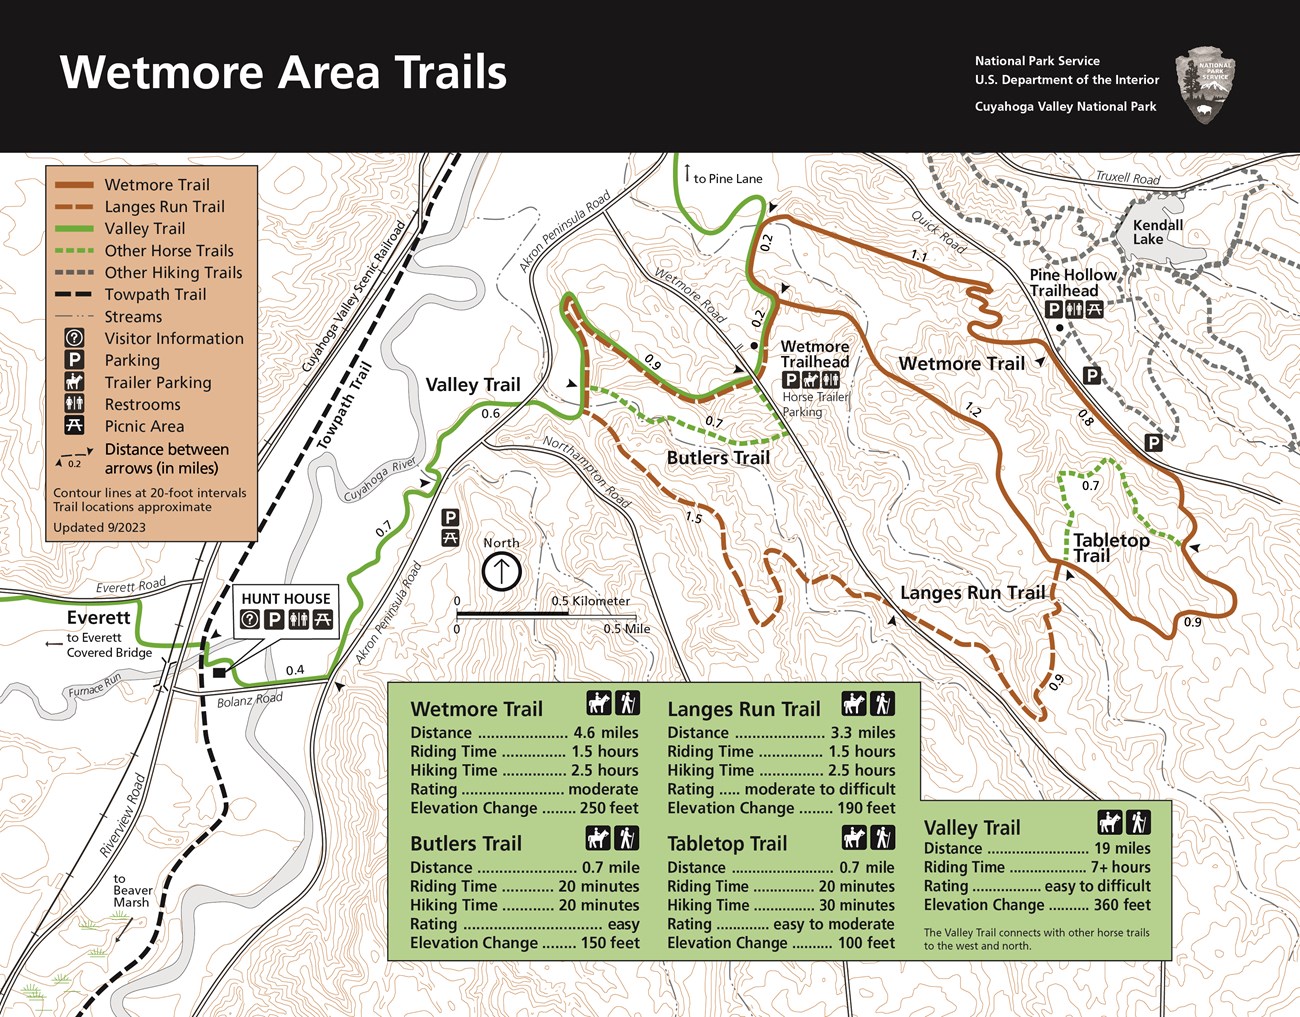 Trail map with black bar at top and white text, "Wetmore Area Trails"; includes information about Wetmore Trail, Butlers Trail, Langes Run Trail, Tabletop Trail, and Valley Trail.